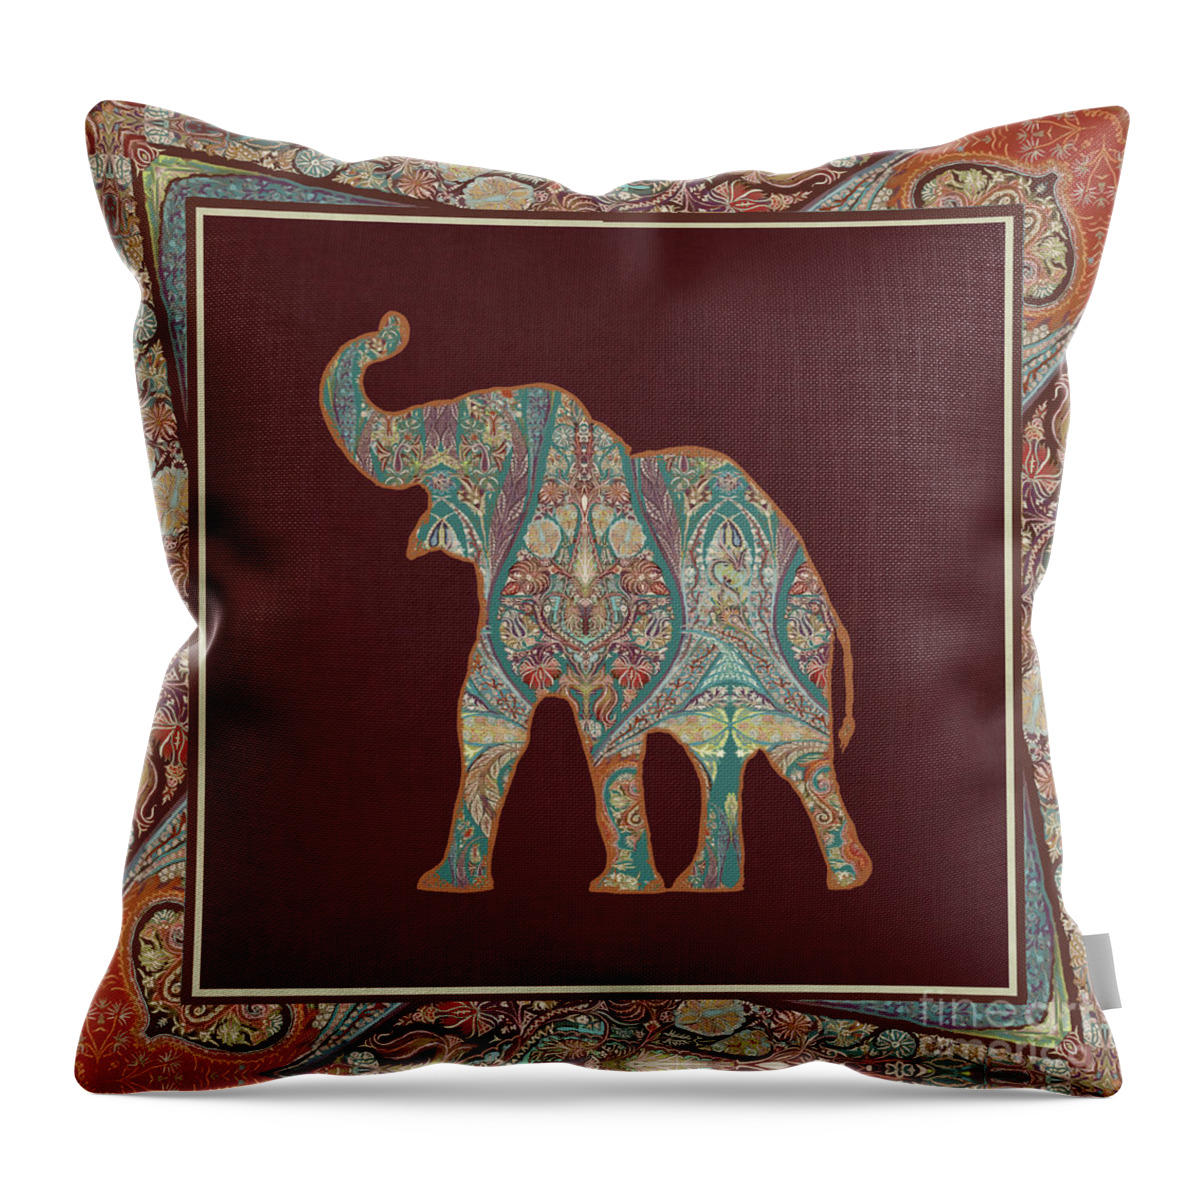 Rust Throw Pillow featuring the painting Kashmir Patterned Elephant 3 - Boho Tribal Home Decor by Audrey Jeanne Roberts